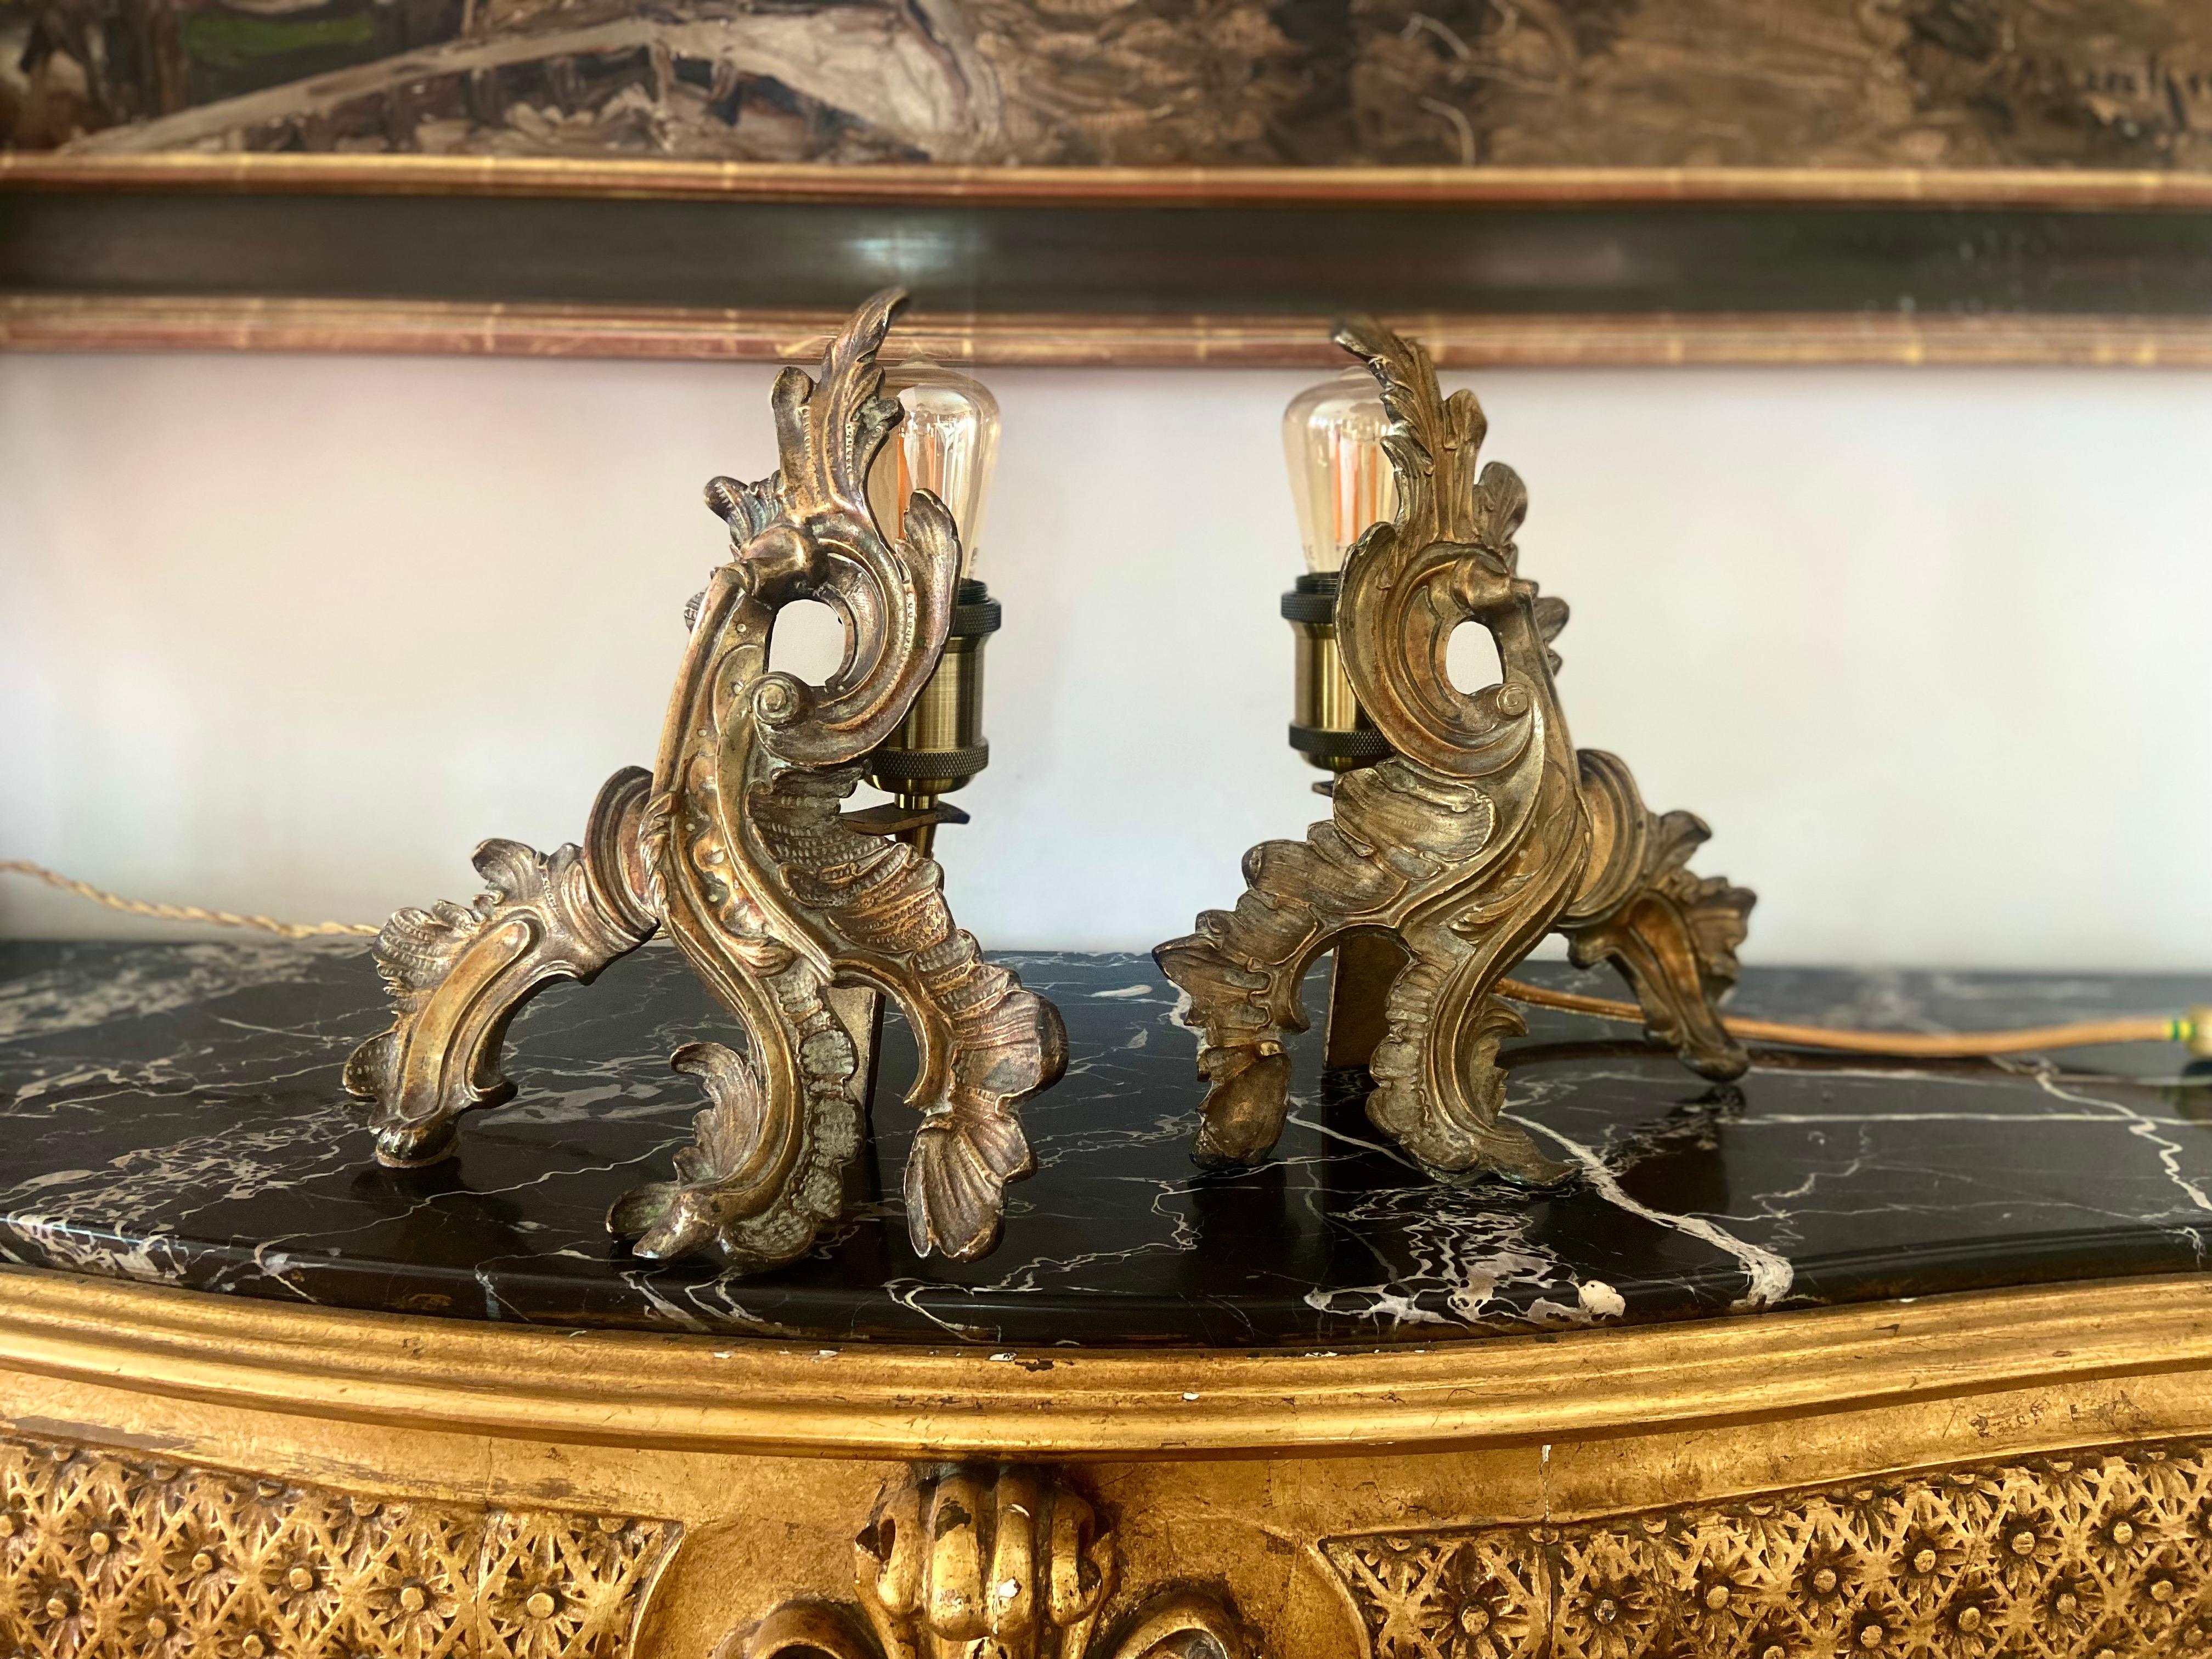 Pair of 19th century French table lamps in Louis XVI style made of bronze fireplace fire dogs that were lately electrified.
France, circa 1880.
 